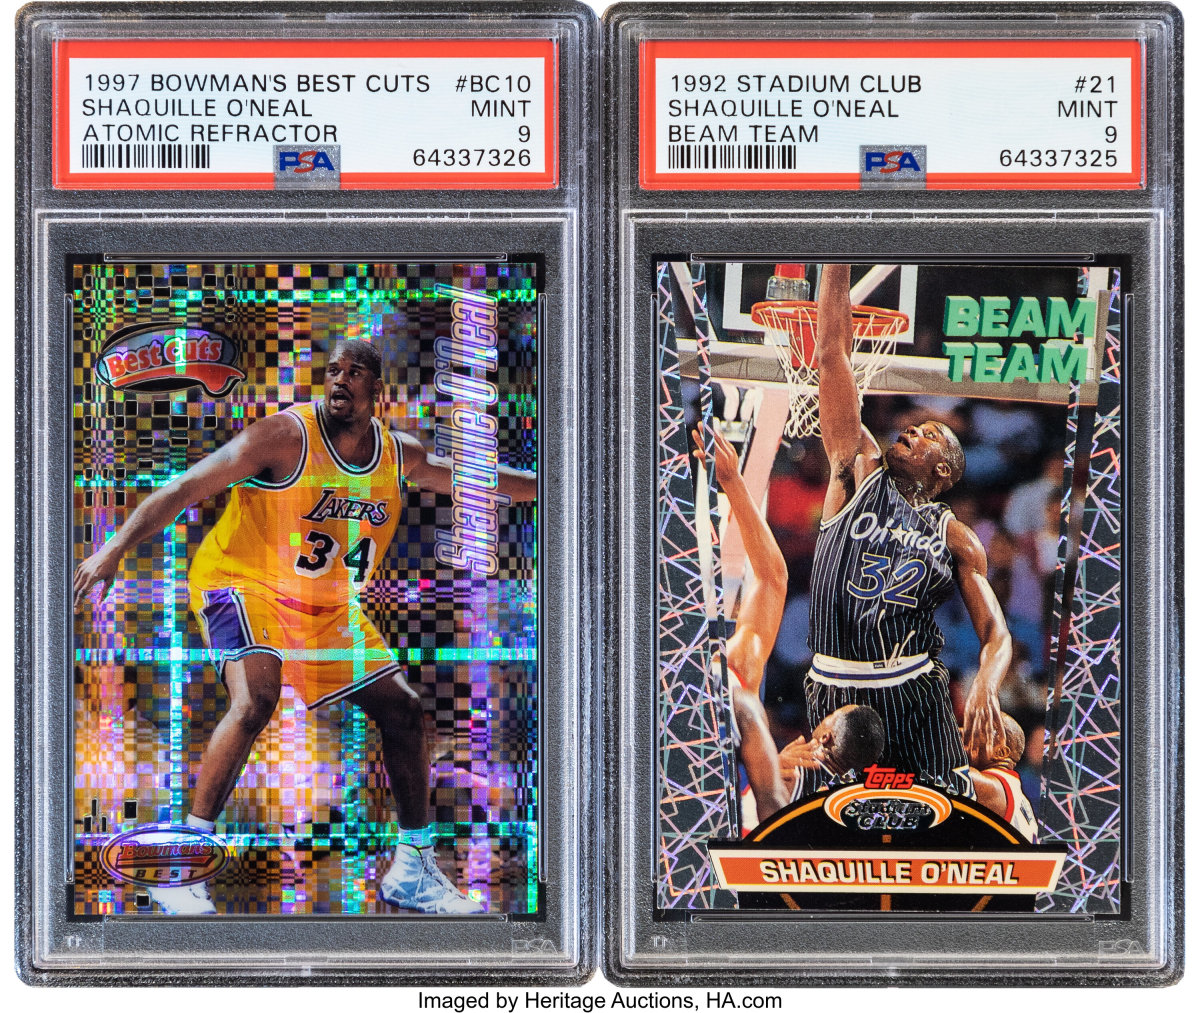 1997 Bowman's Best and 1992 Stadium Club Shaquille O'Neal cards.